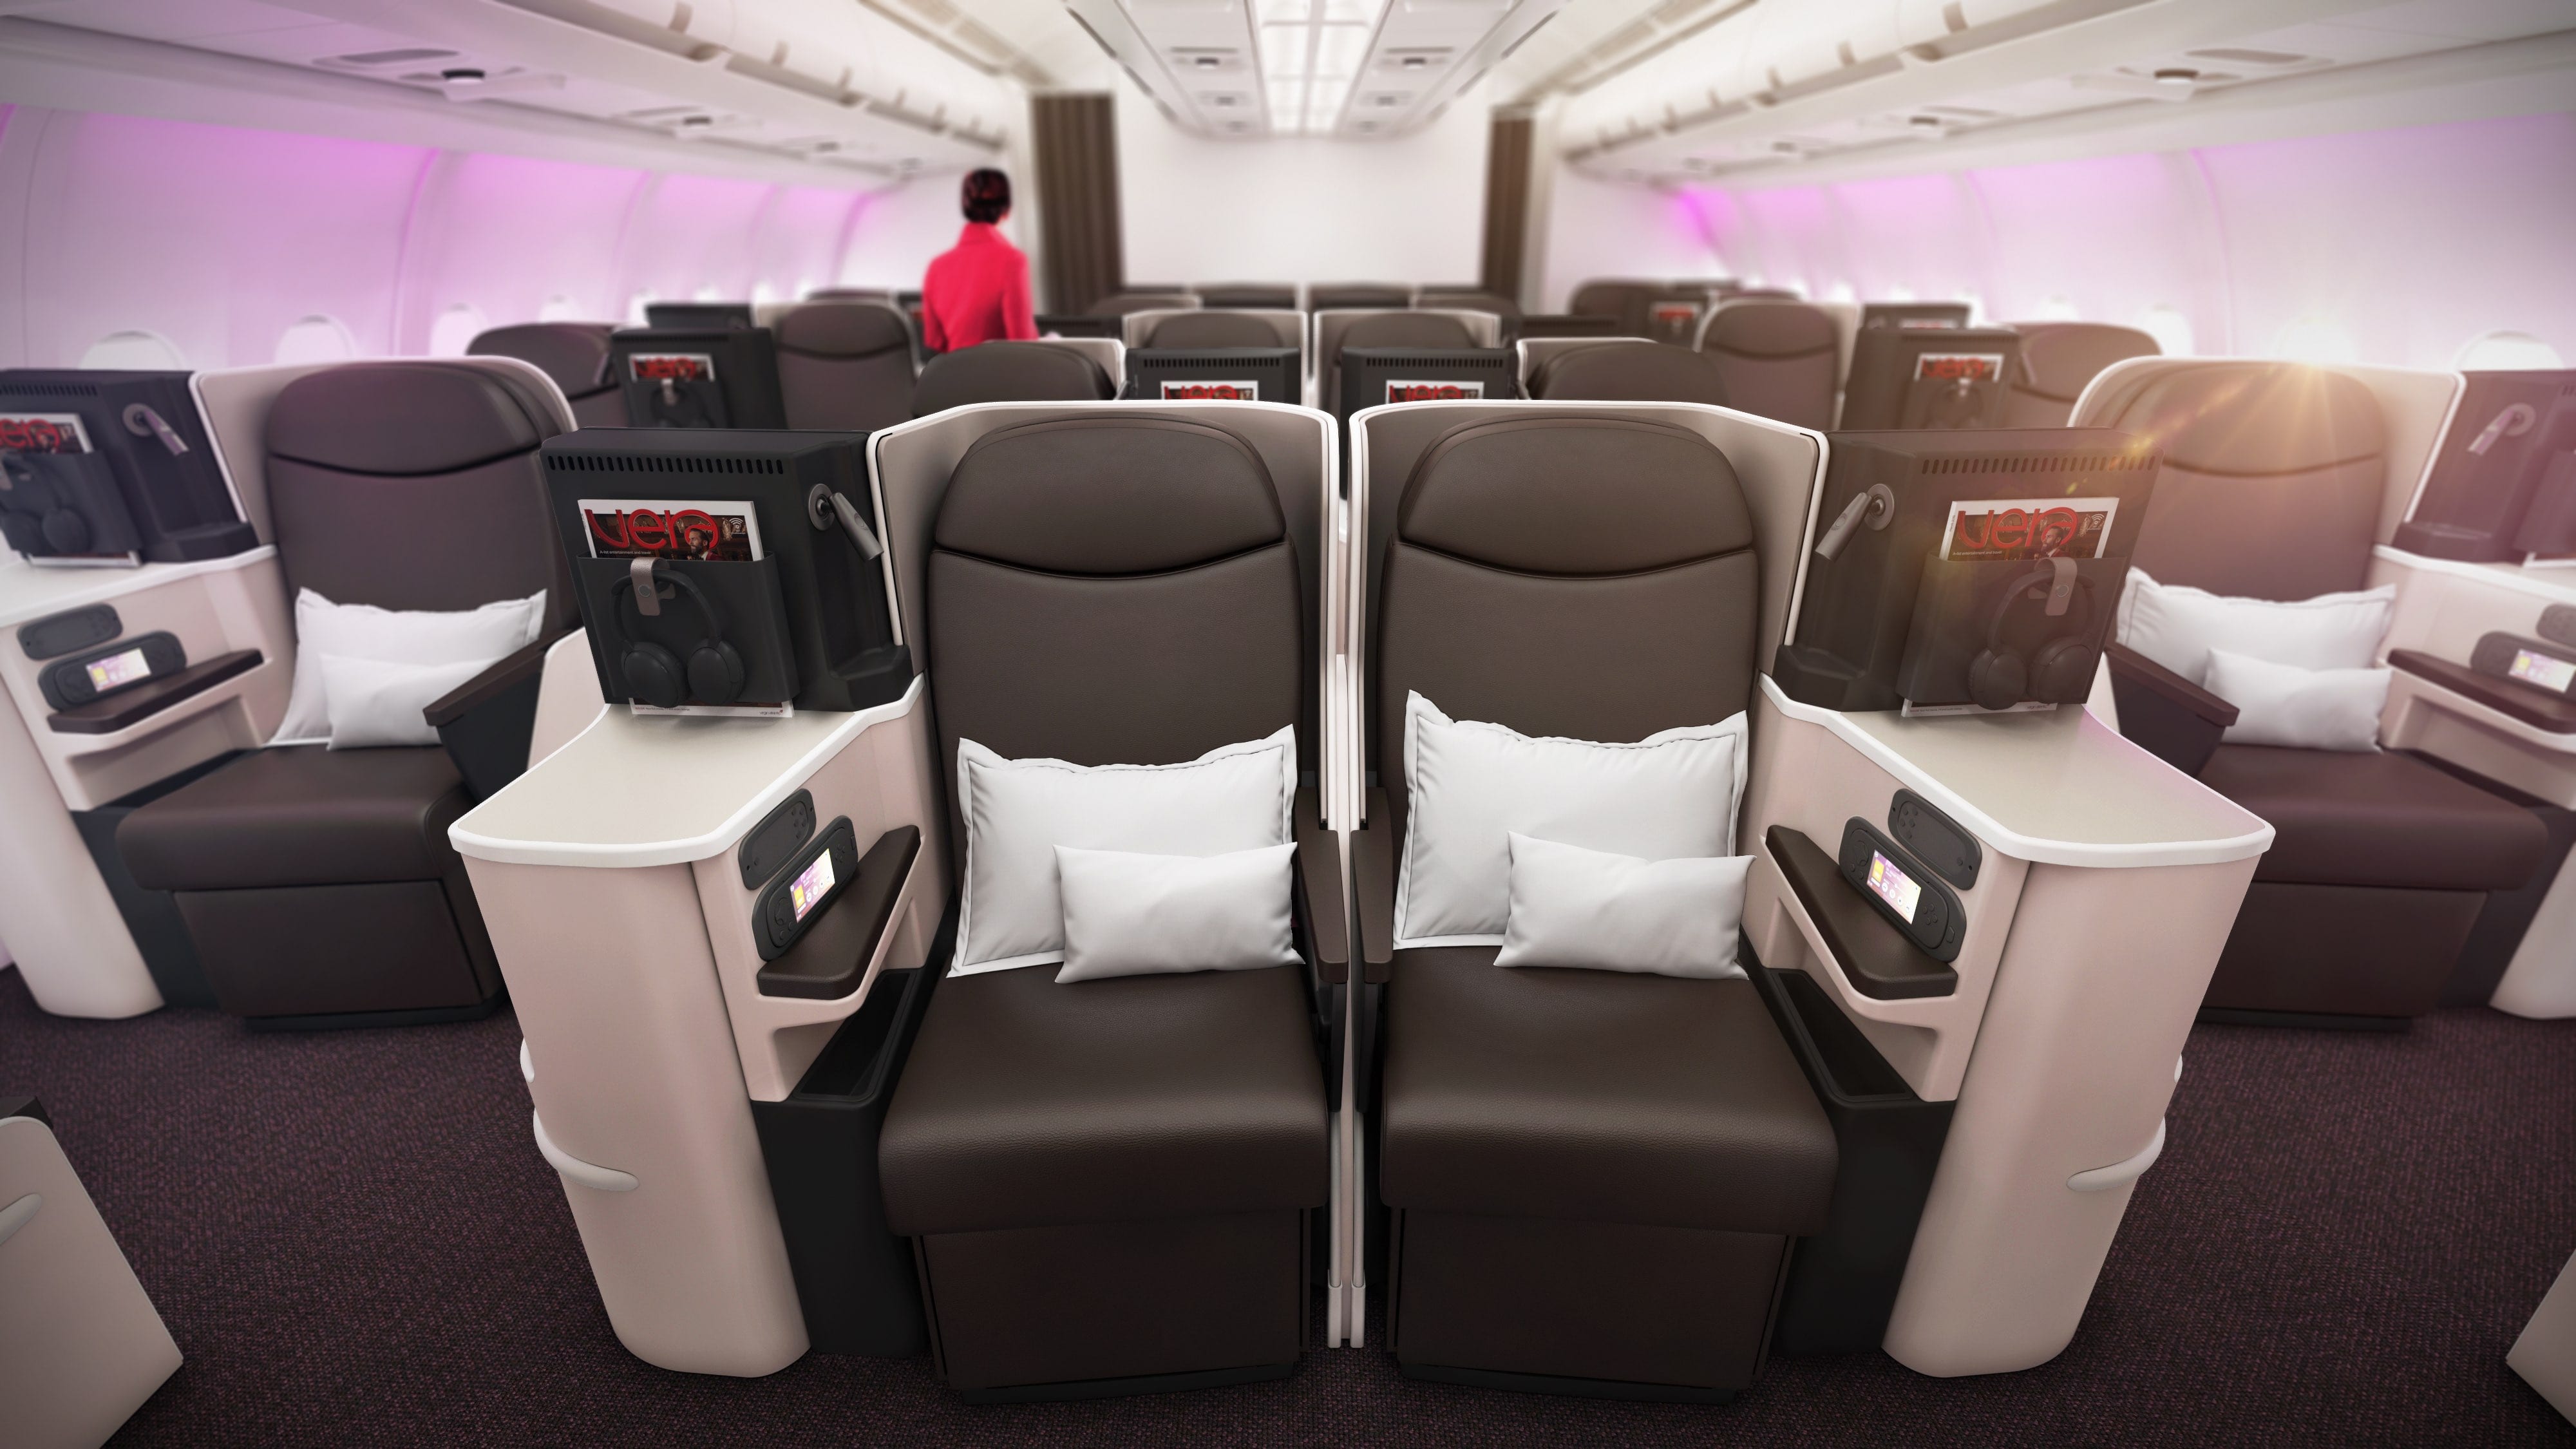 Virgin Atlantic Reveals Cabin Makeover For Airbus A330 200